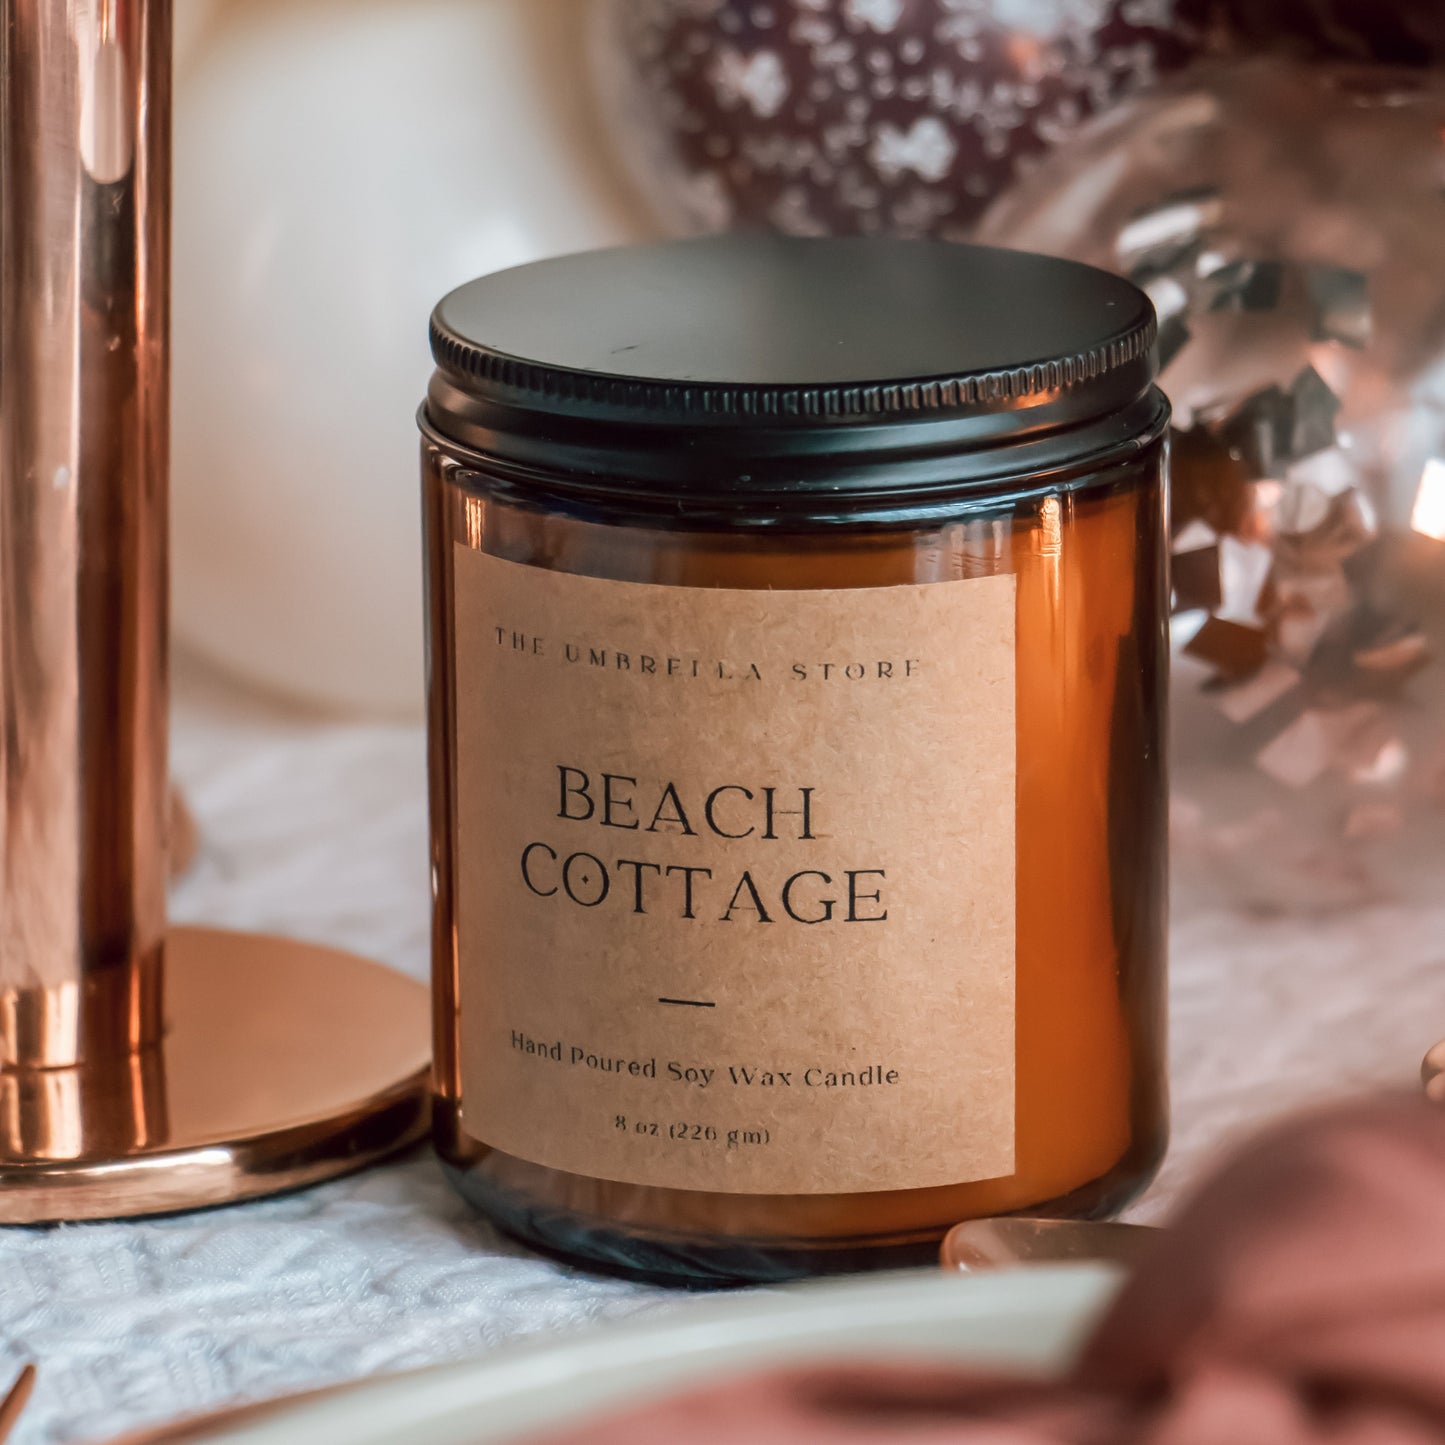 Beach cottage scented candle